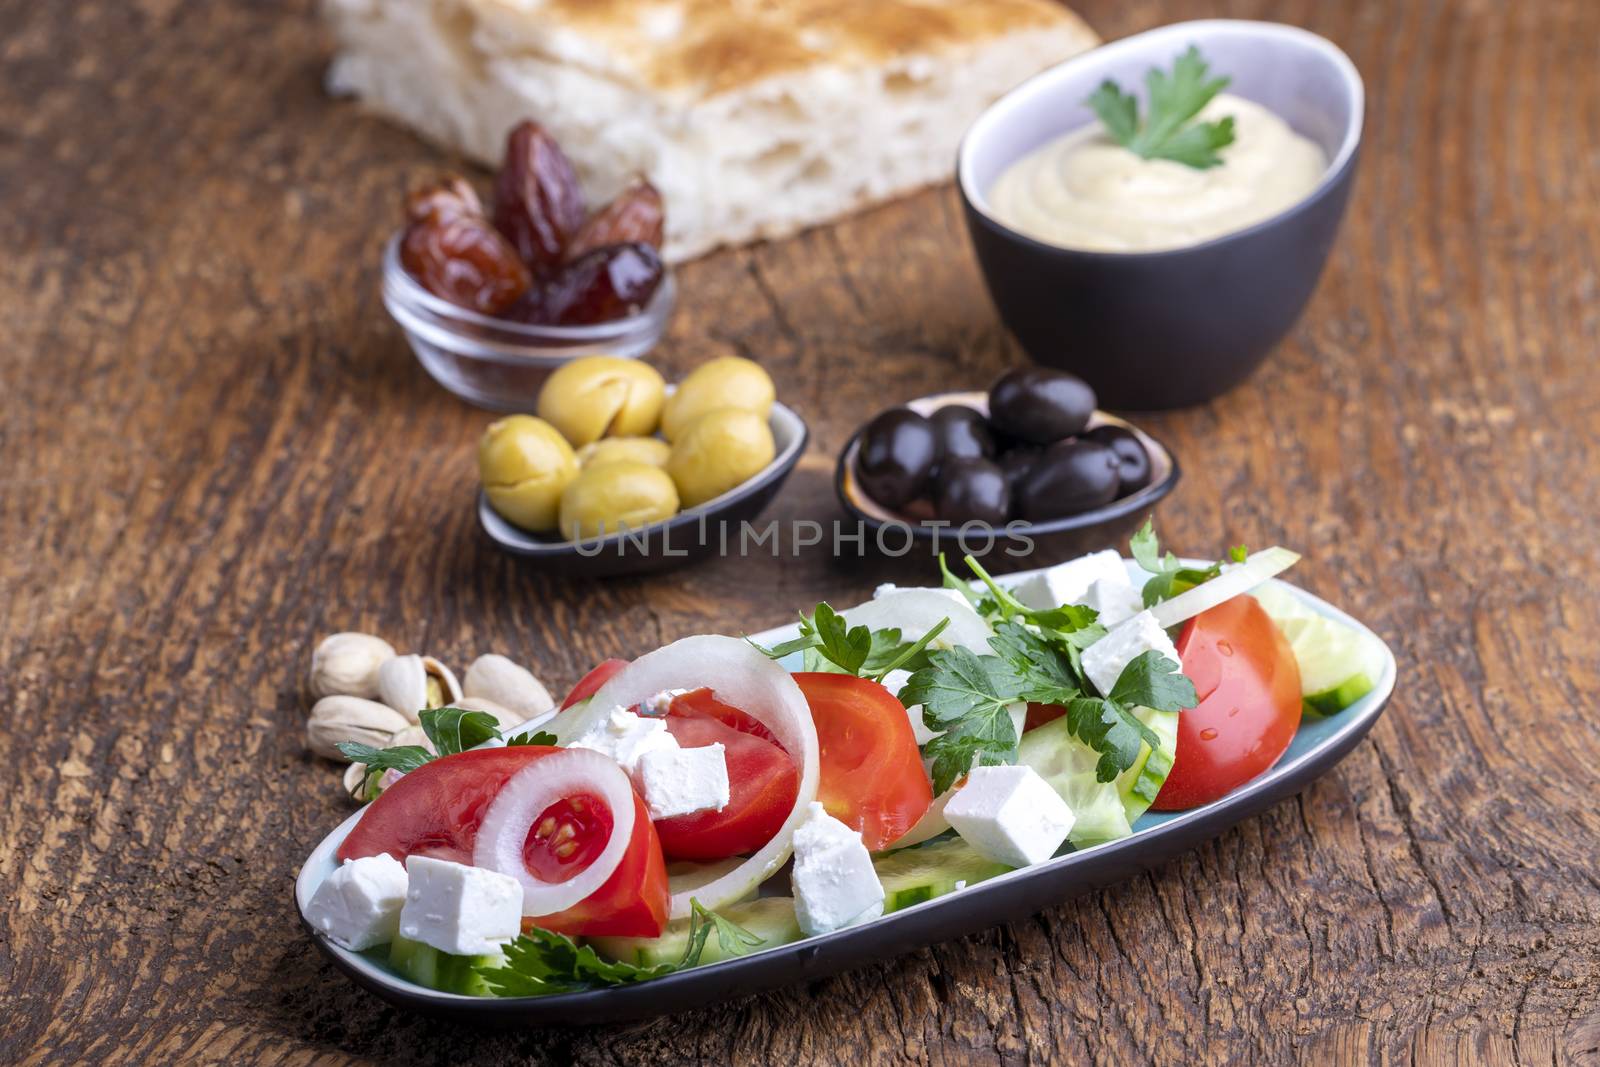 olives and hummus by bernjuer